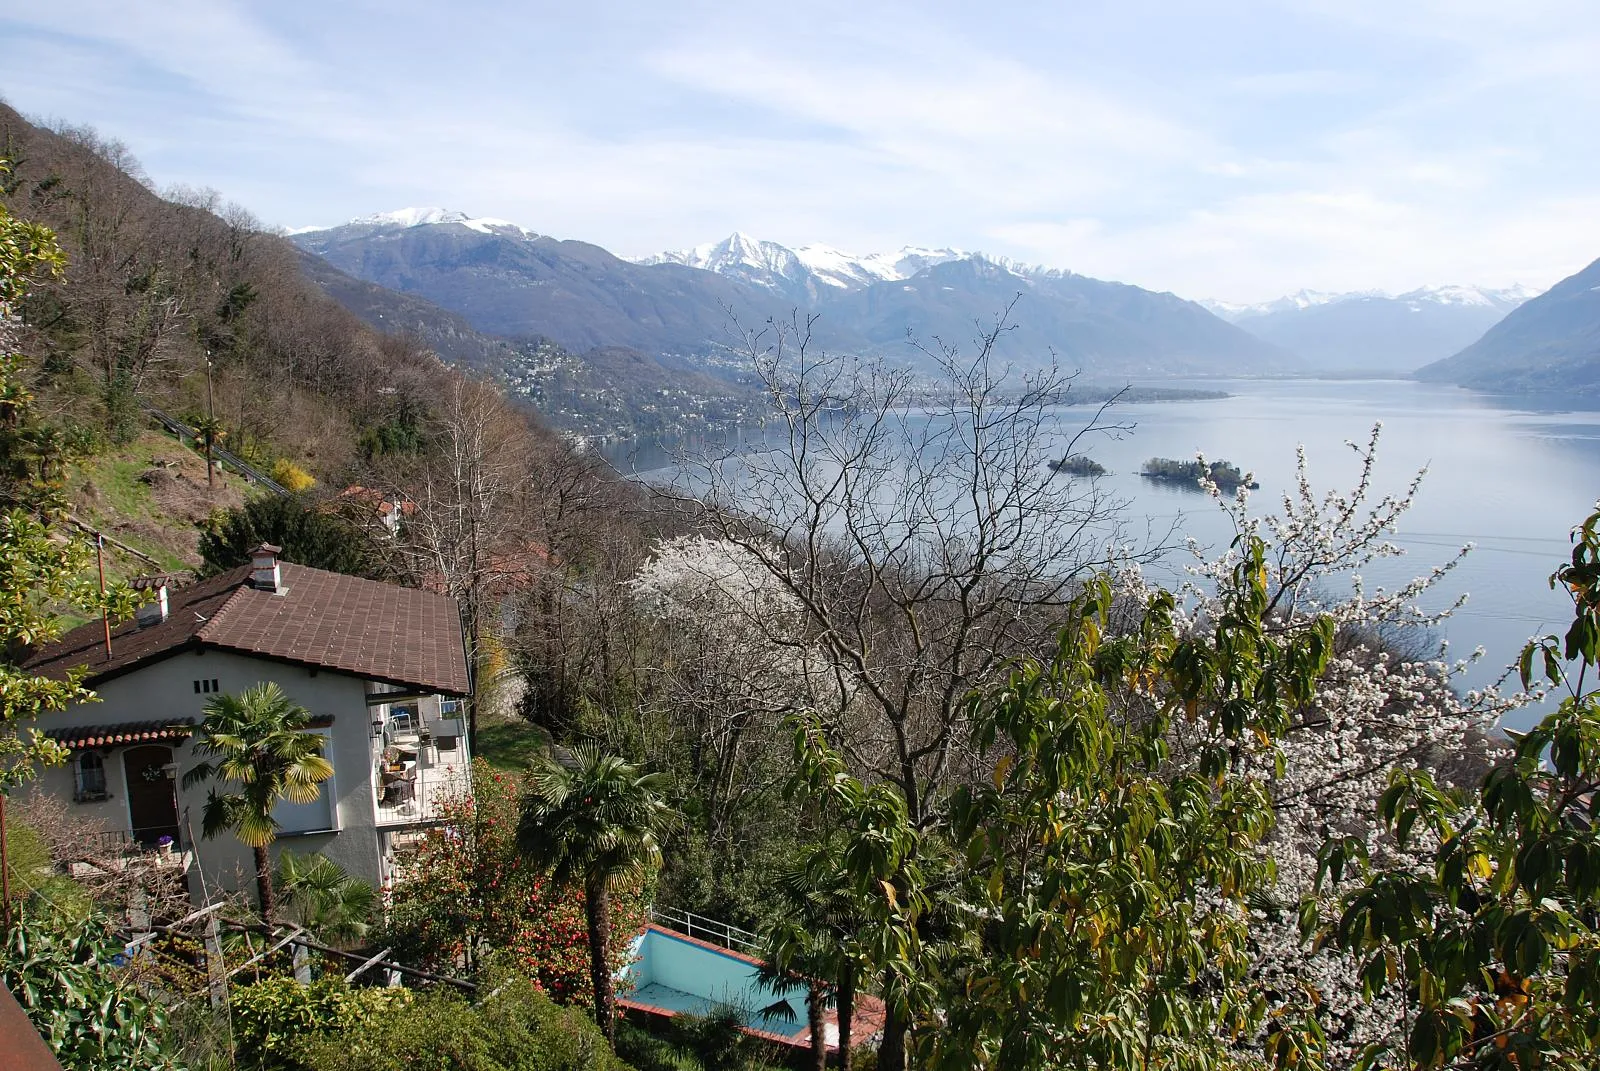 Photo showing: View from the Porta section of Brissago, Ticino, Switzerland looking over Lake Maggiorre